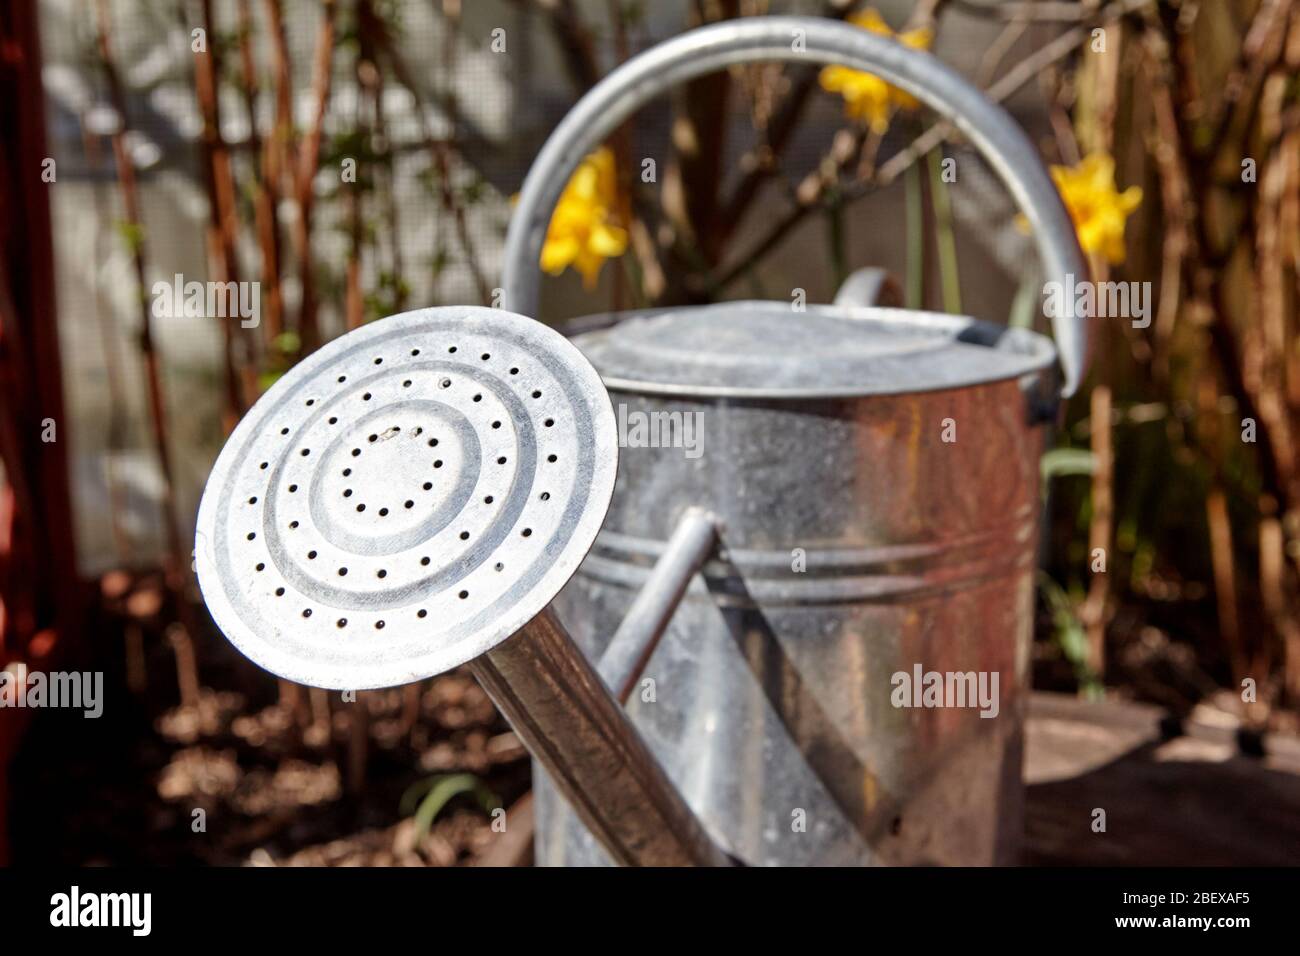 rose on an old fashioned style metal watering can in a garden Newtownabbey Northern Ireland UK Stock Photo